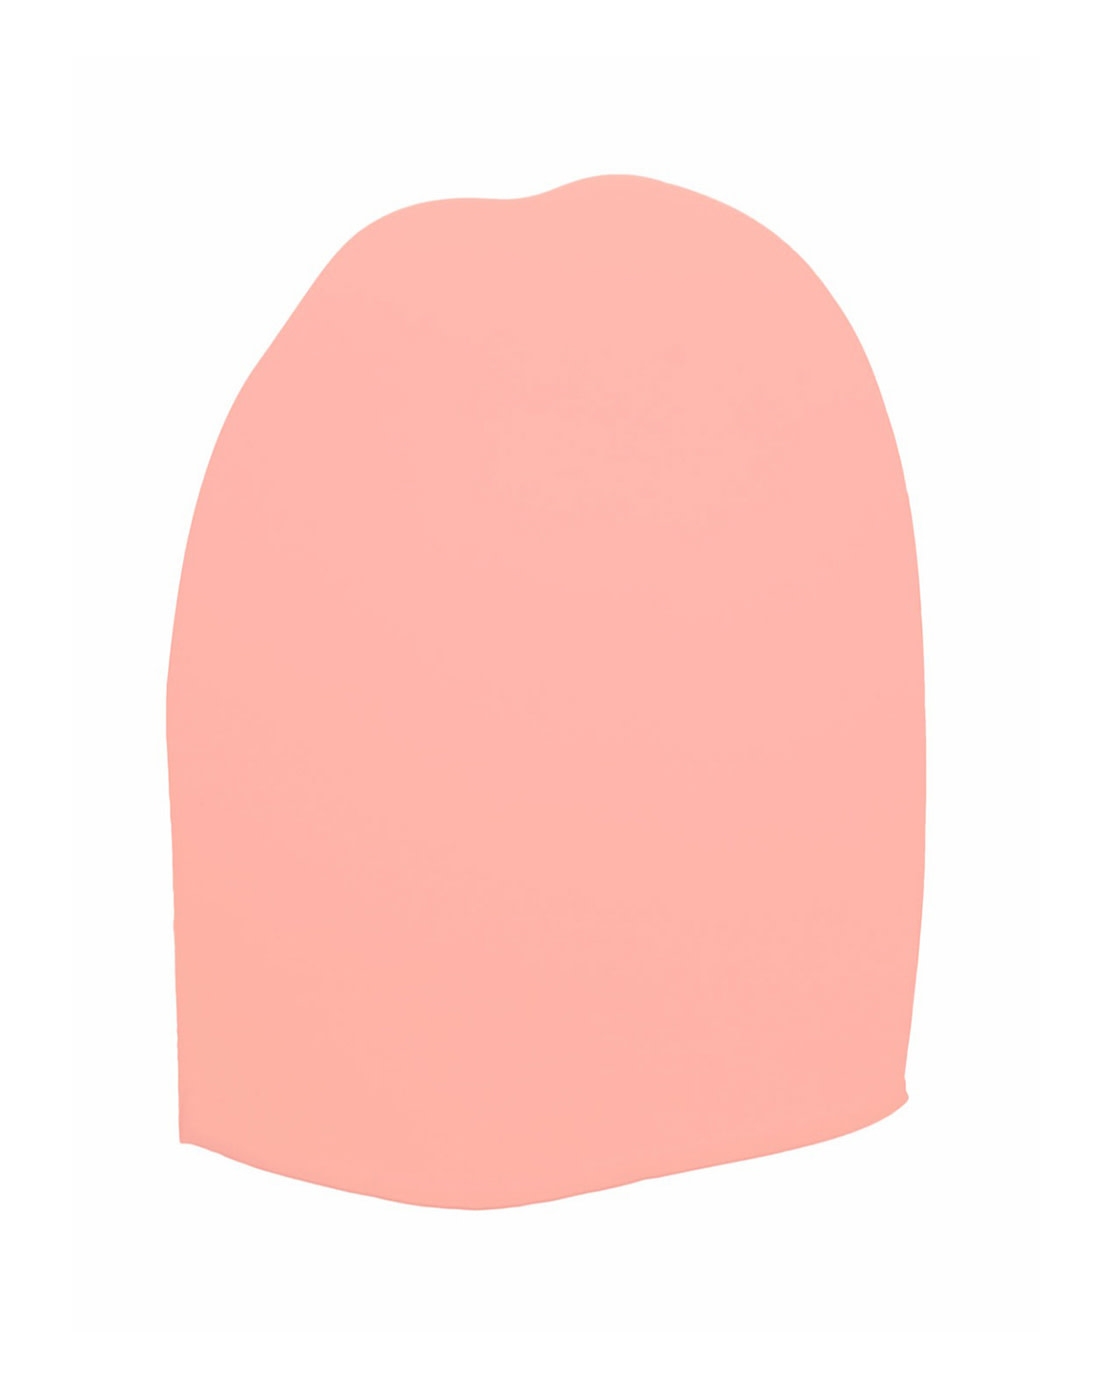 Clare Paint - Rosé Season - Wall Swatch - Image 0